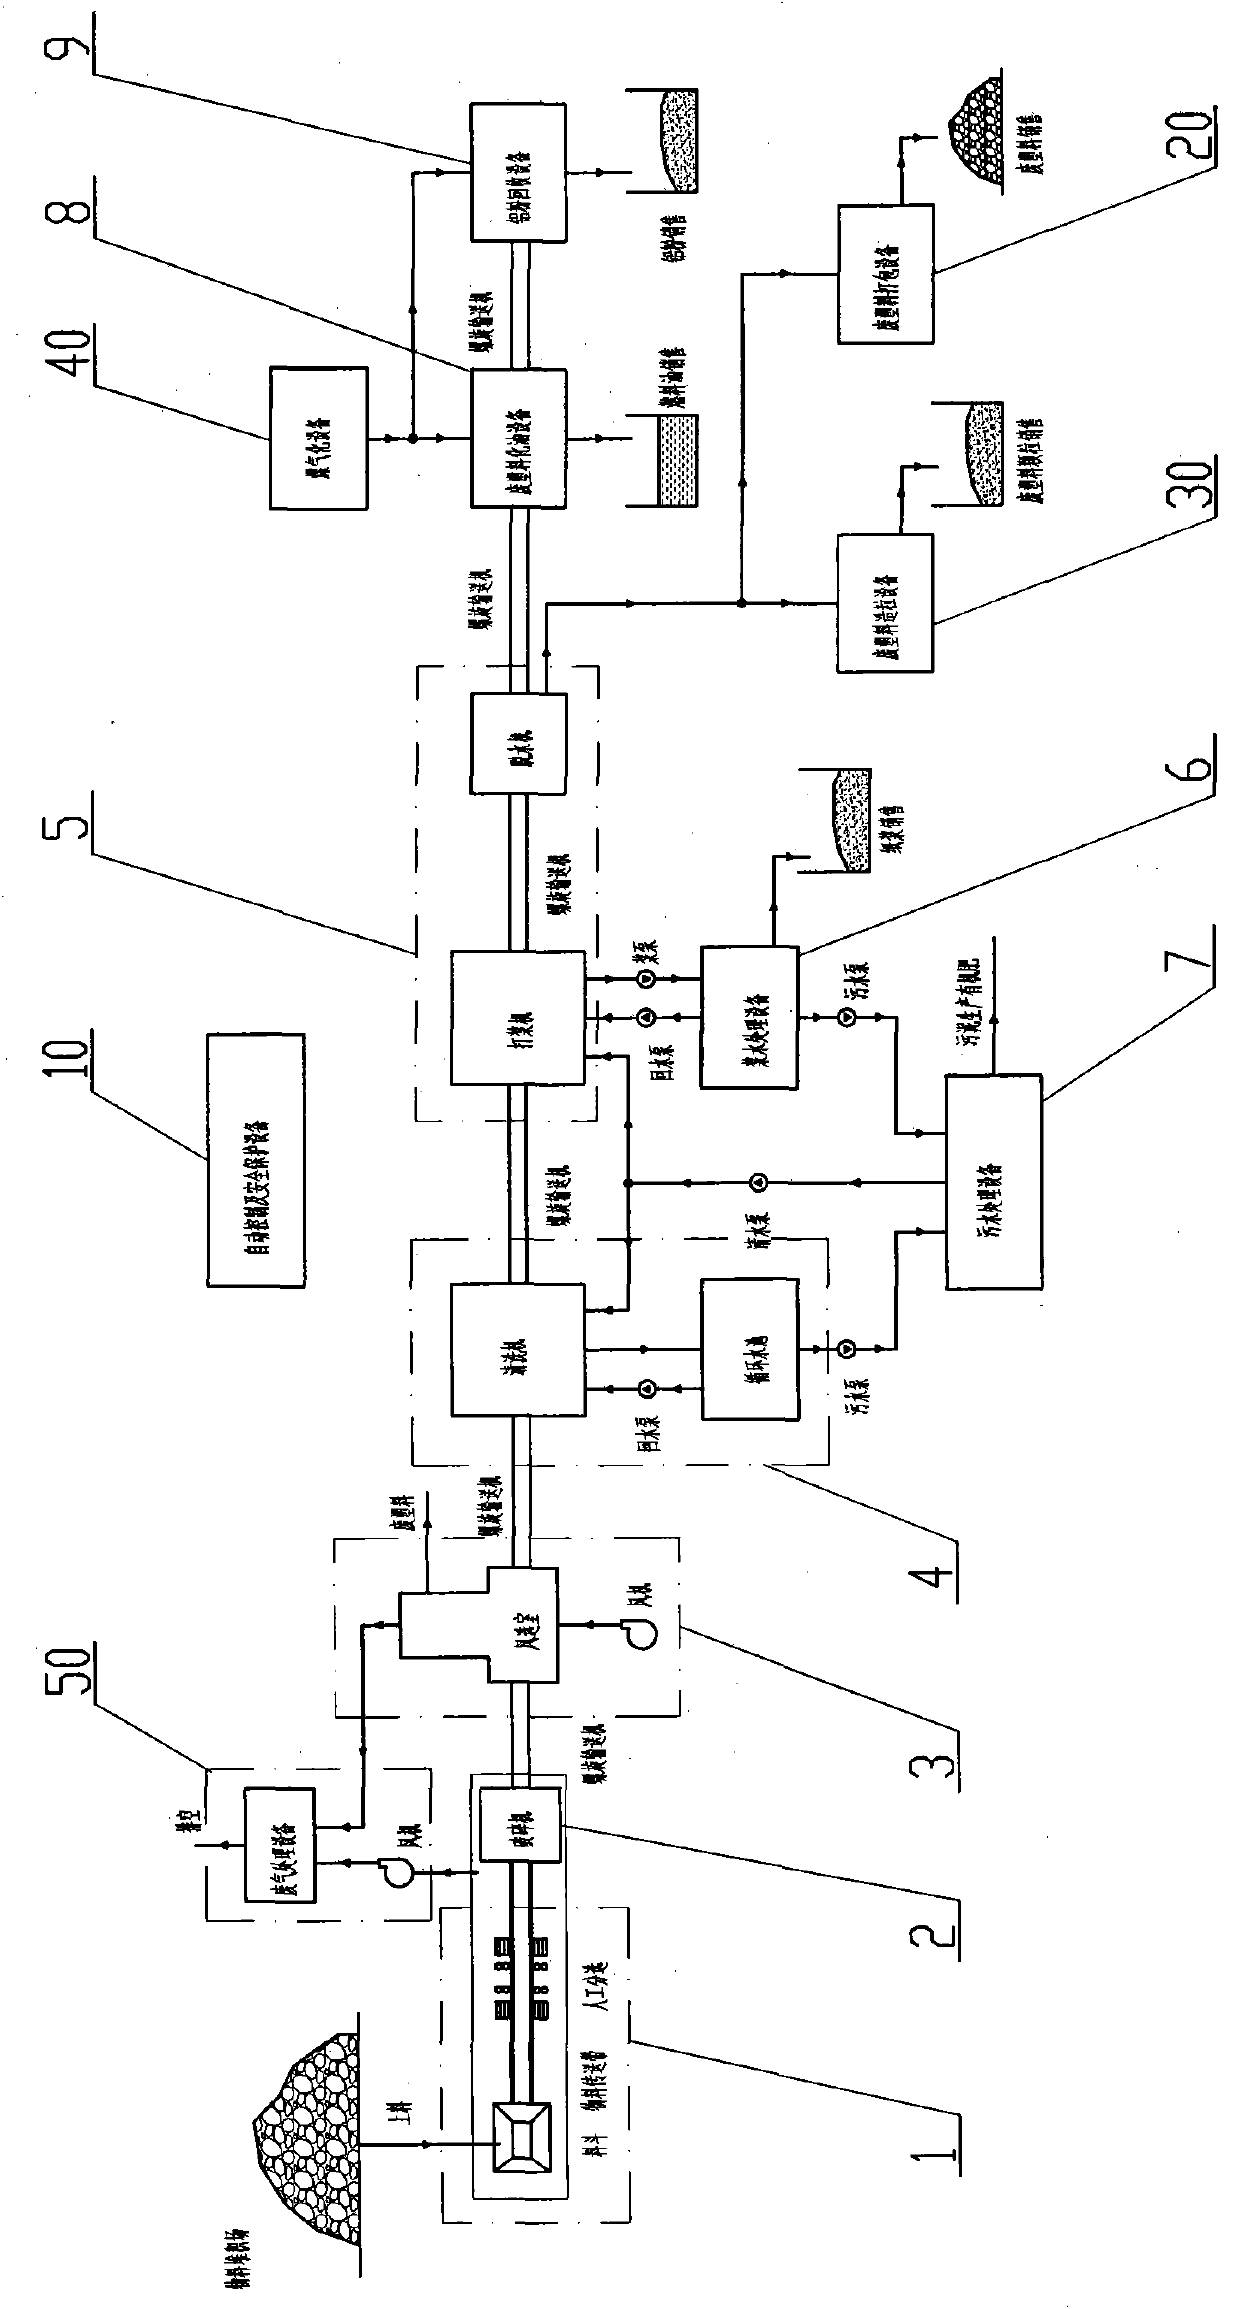 Resource recycling system of discarded papers, plastics or composite materials thereof